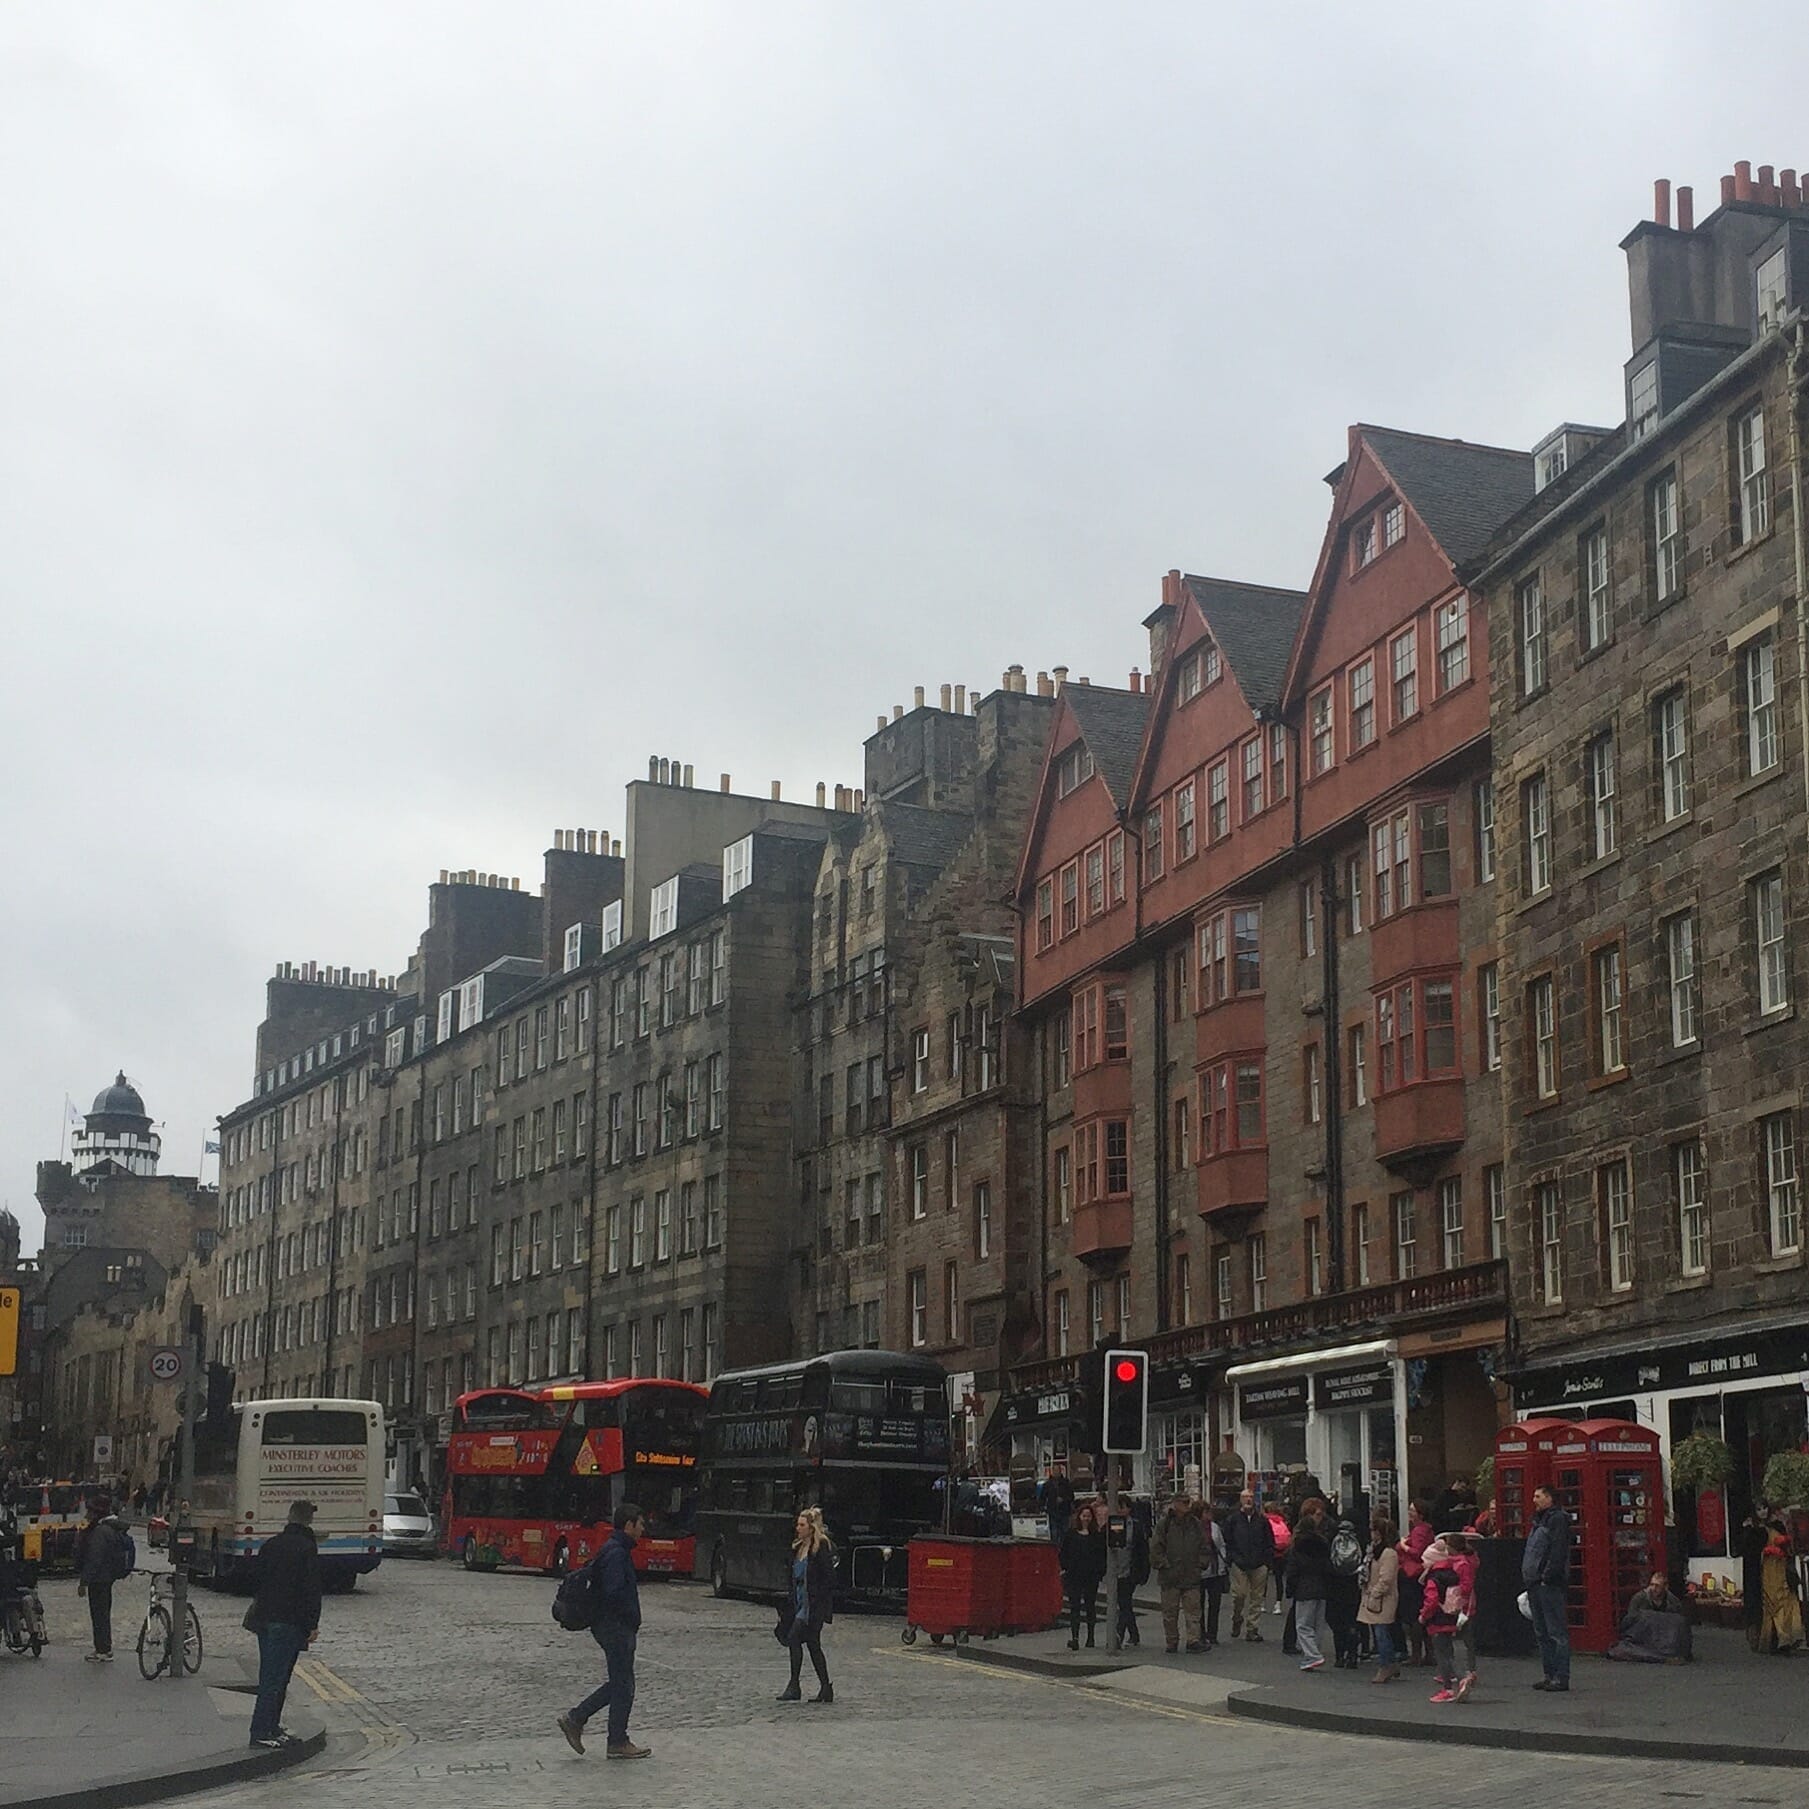 people walking on the street and the beautiful architecture of the Royal Mile in Edinburgh